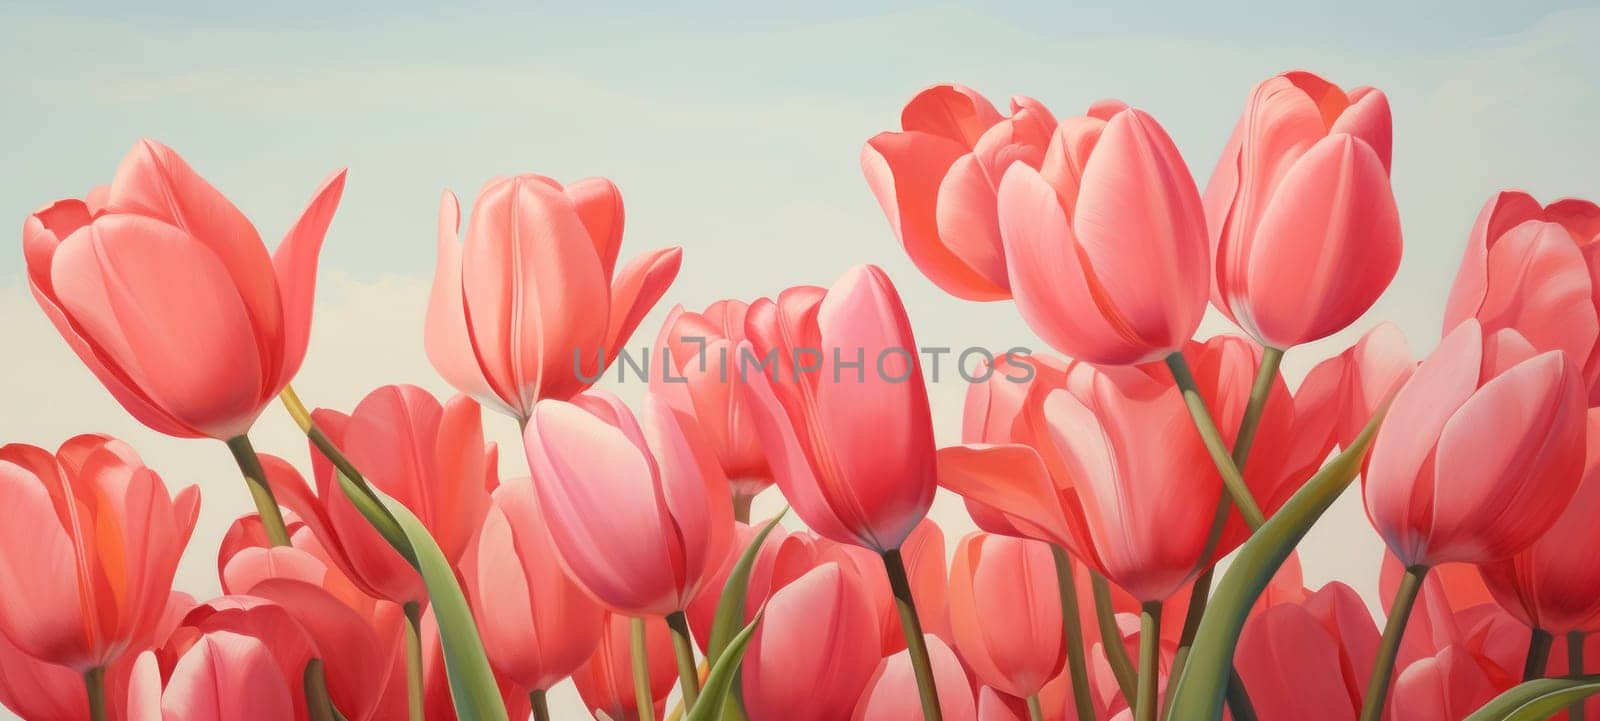 Close-up of Vibrant Pink Tulips in Bloom by andreyz